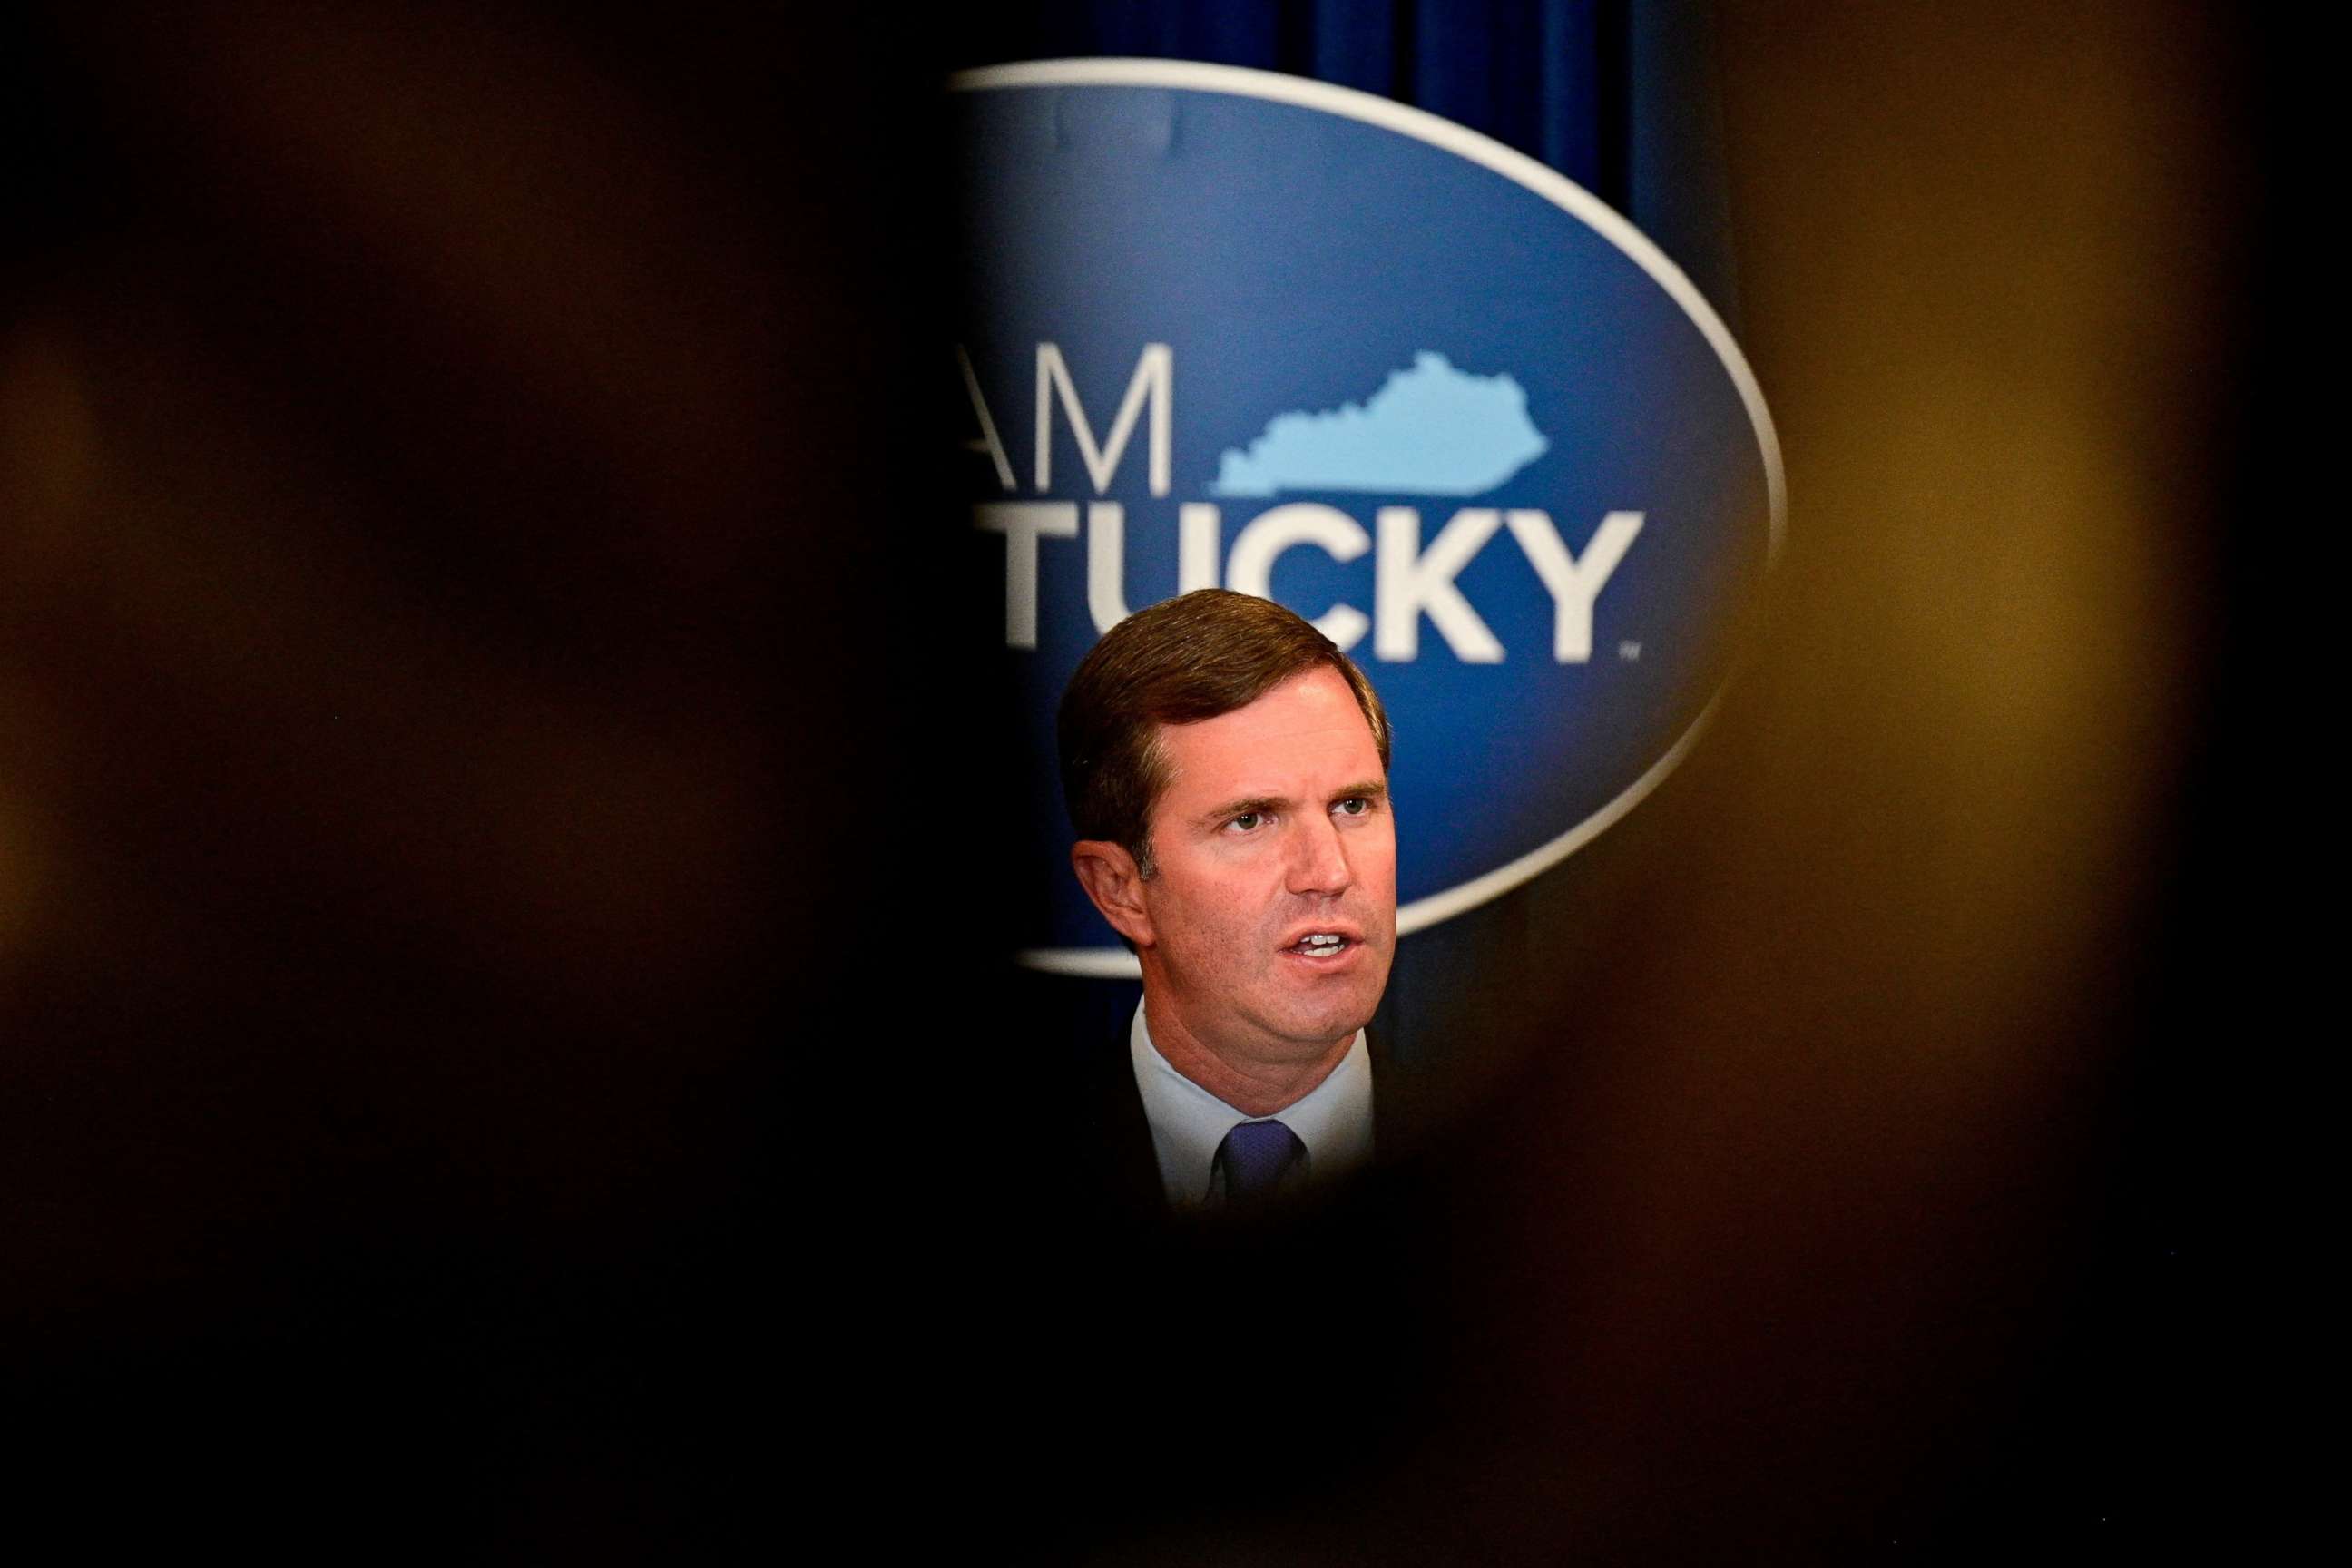 PHOTO: Kentucky's Democratic governor, Andy Beshear, speaks in Frankfort, Ky., Nov. 14, 2021.